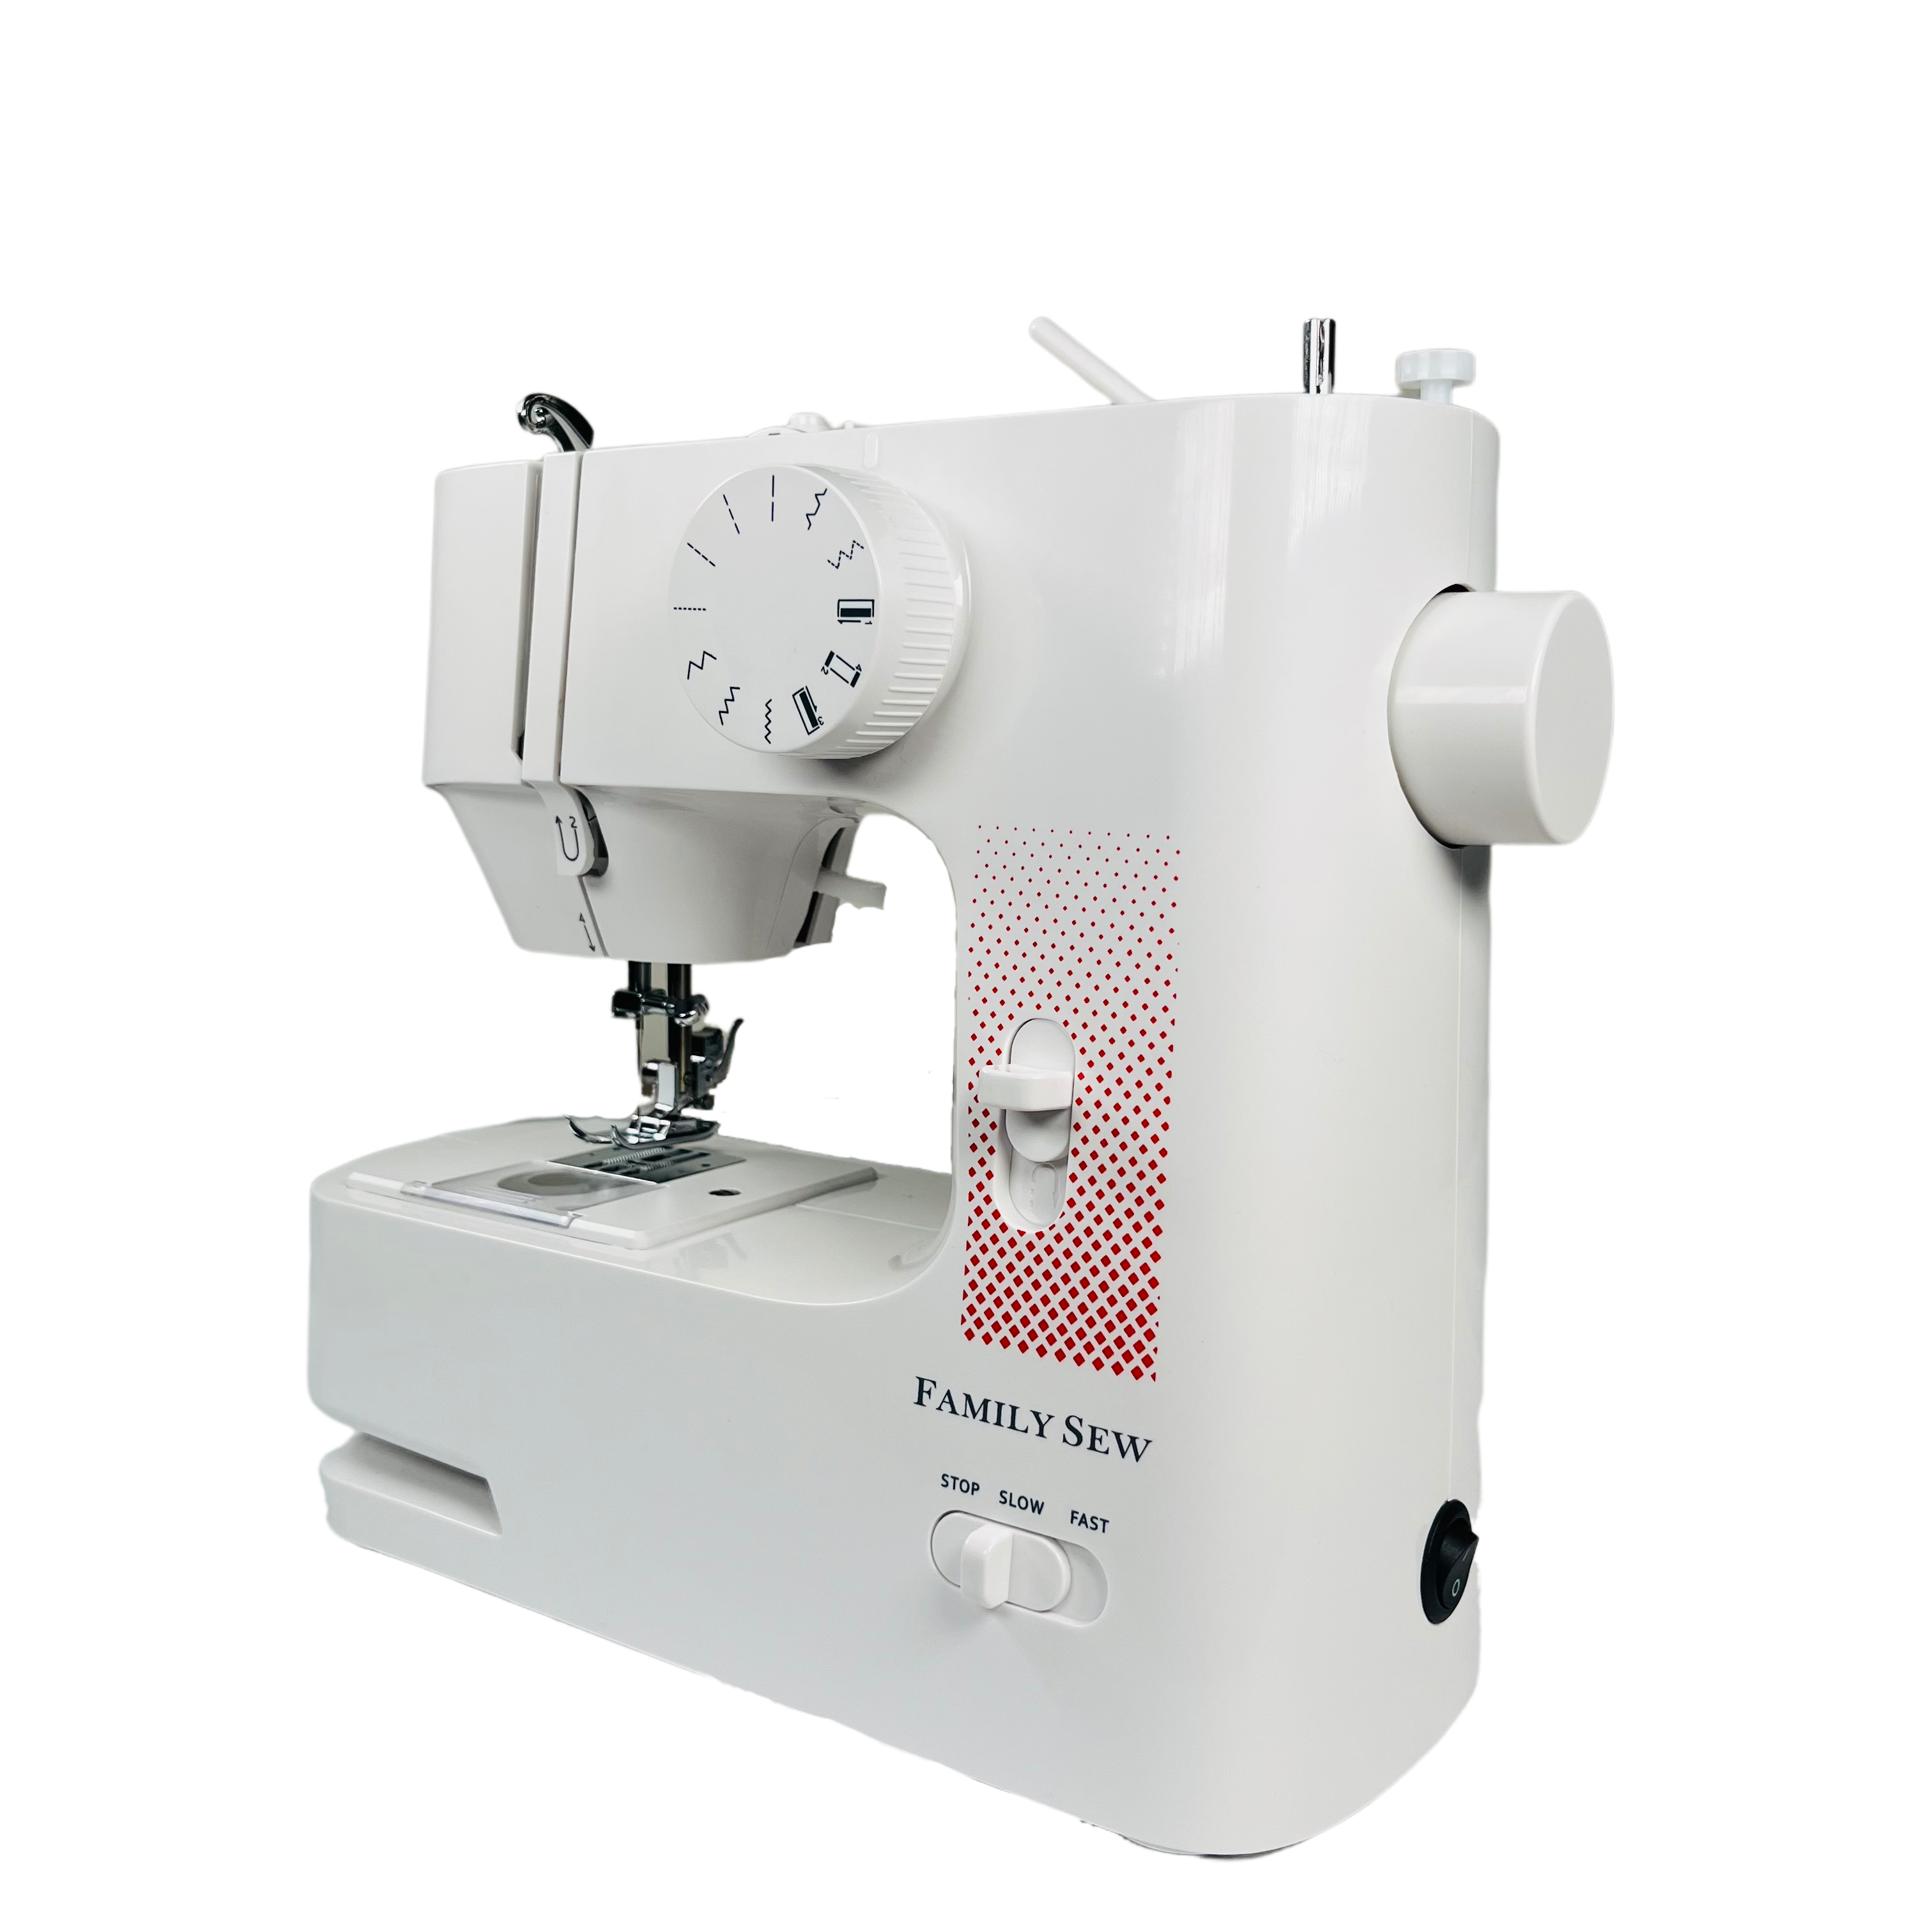  SINGER  Brilliance 6180 Portable Sewing Machine with Easy  Threading and Free Arm, White/Gray : Arts, Crafts & Sewing